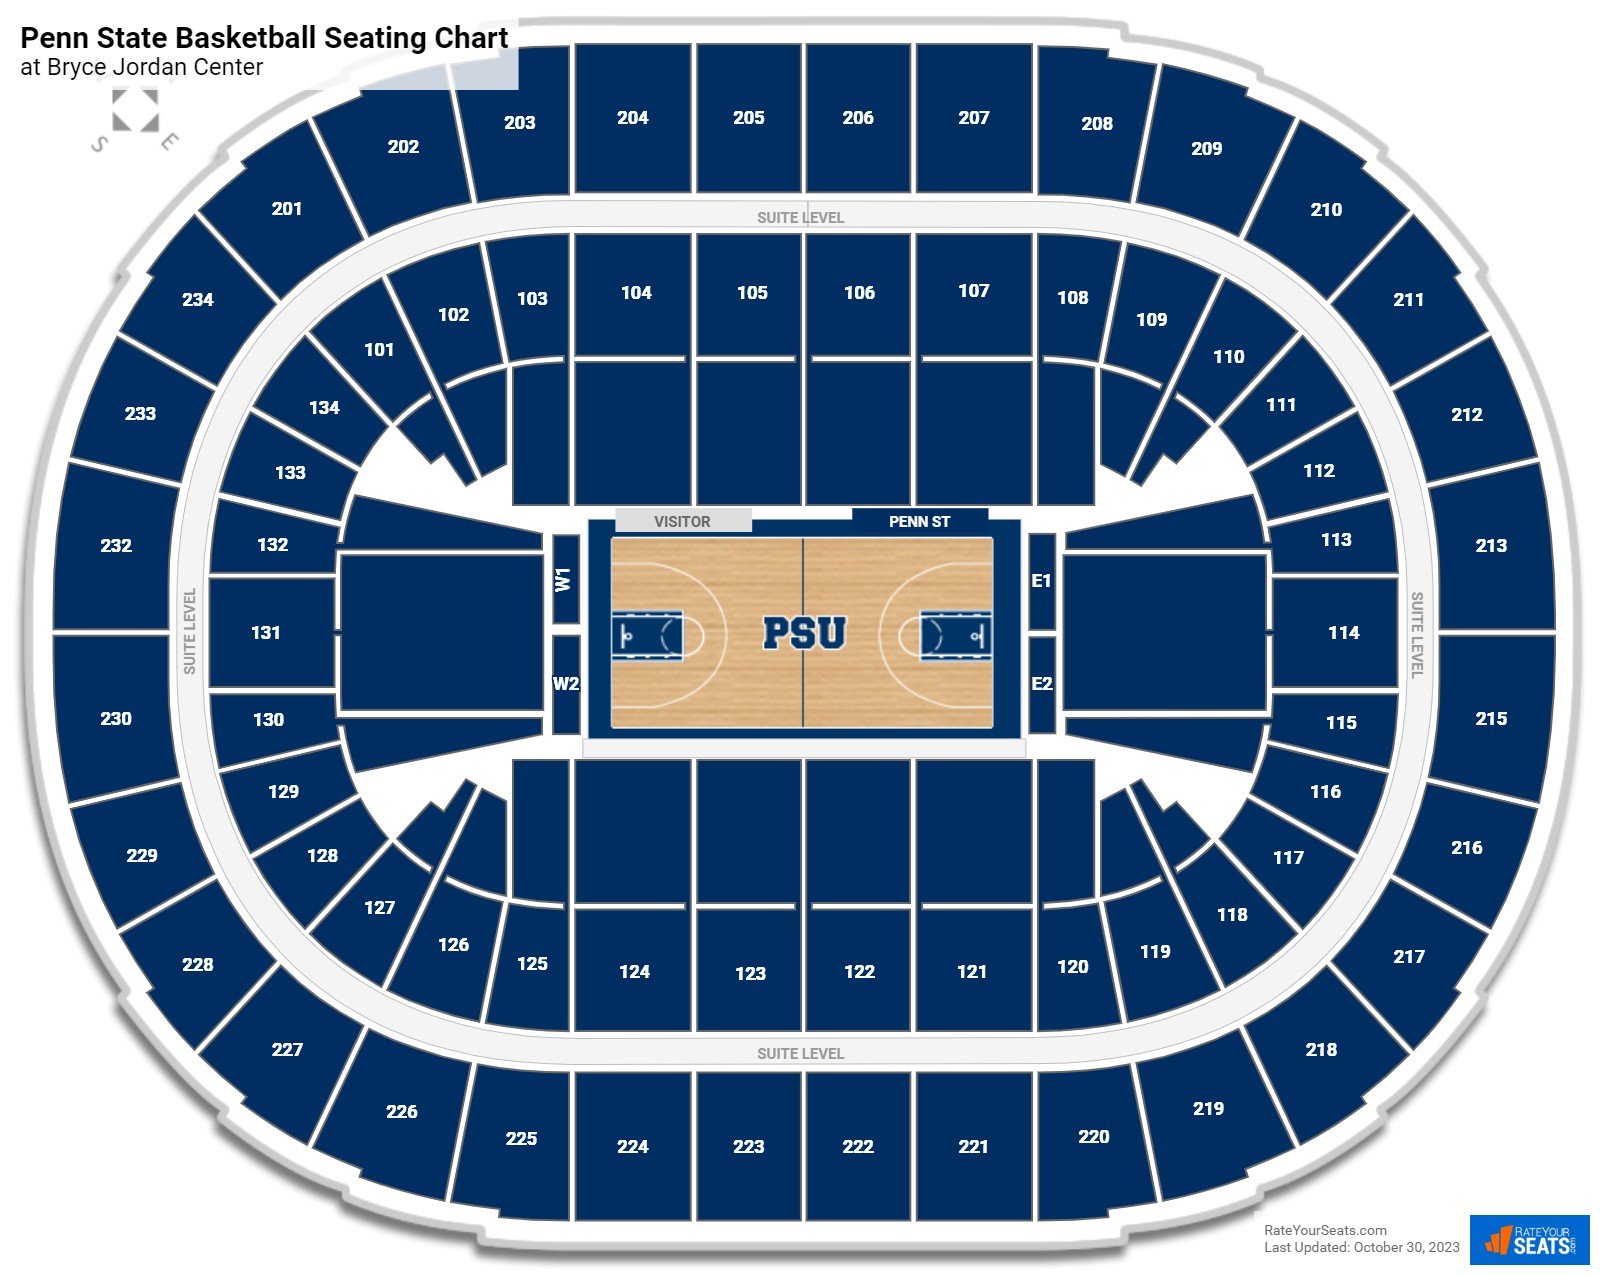 Penn State Nittany Lions Seating Chart at Bryce Jordan Center